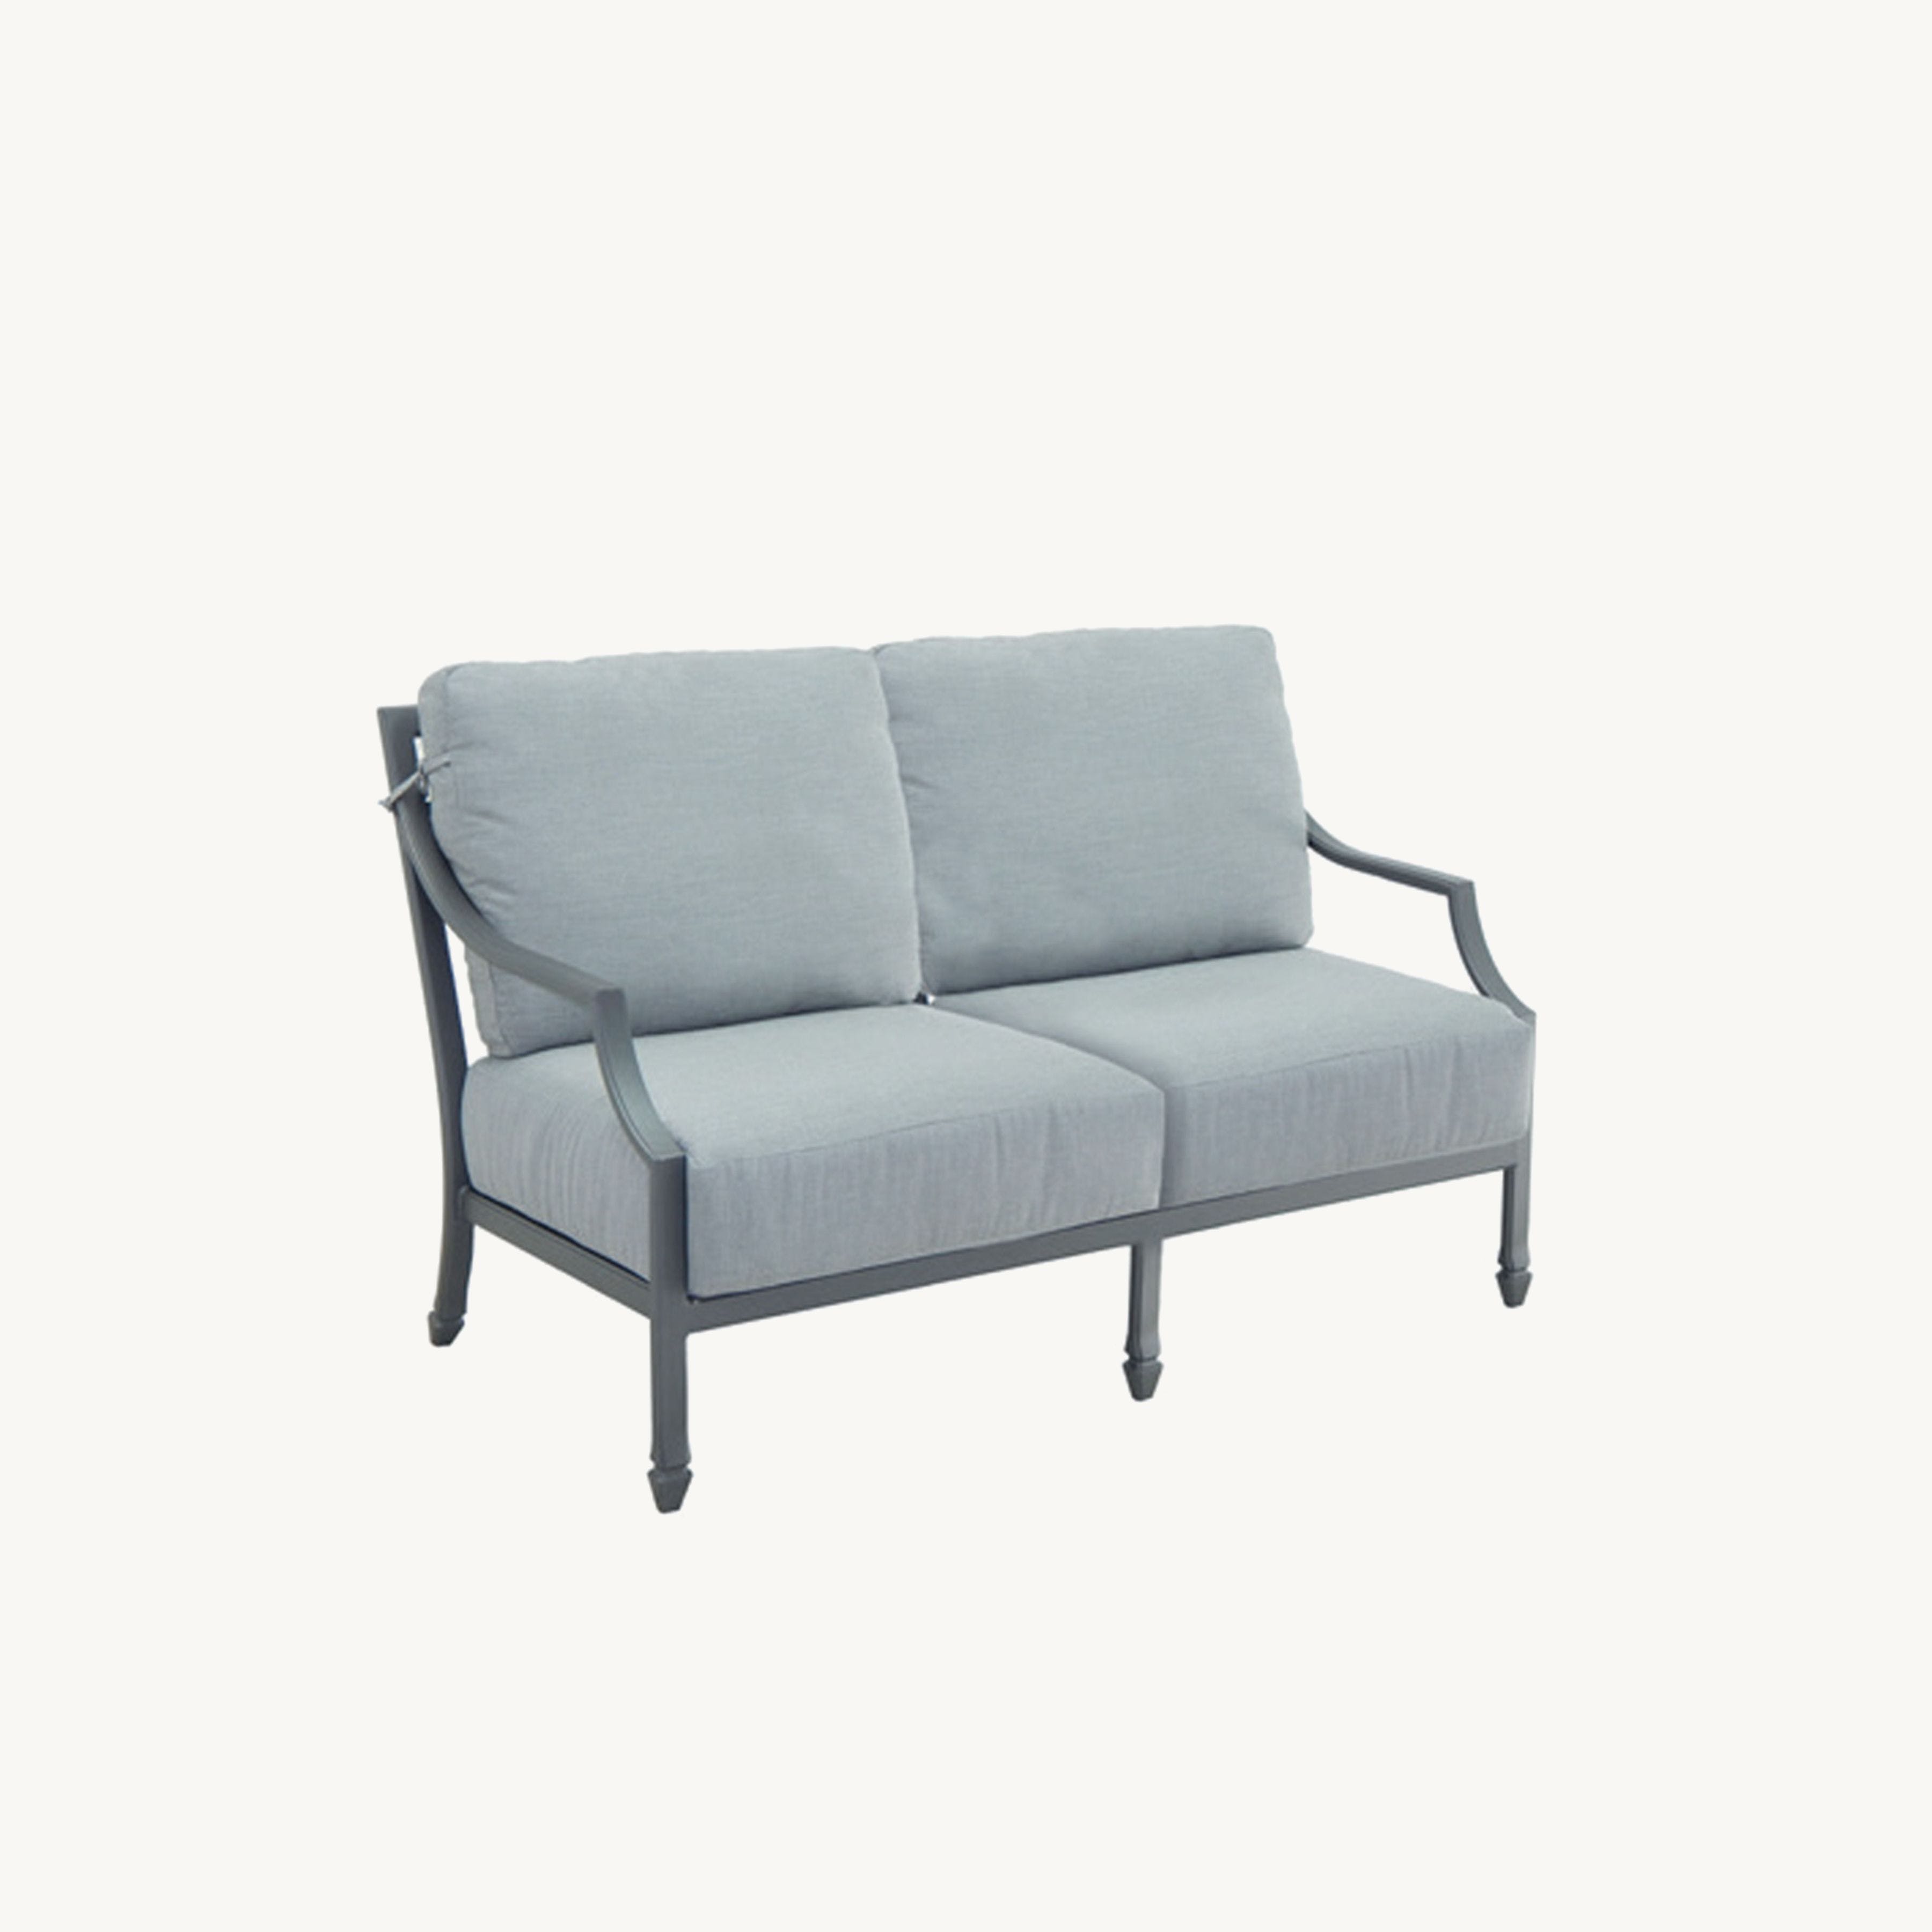 Lancaster Cushioned Loveseat By Castelle